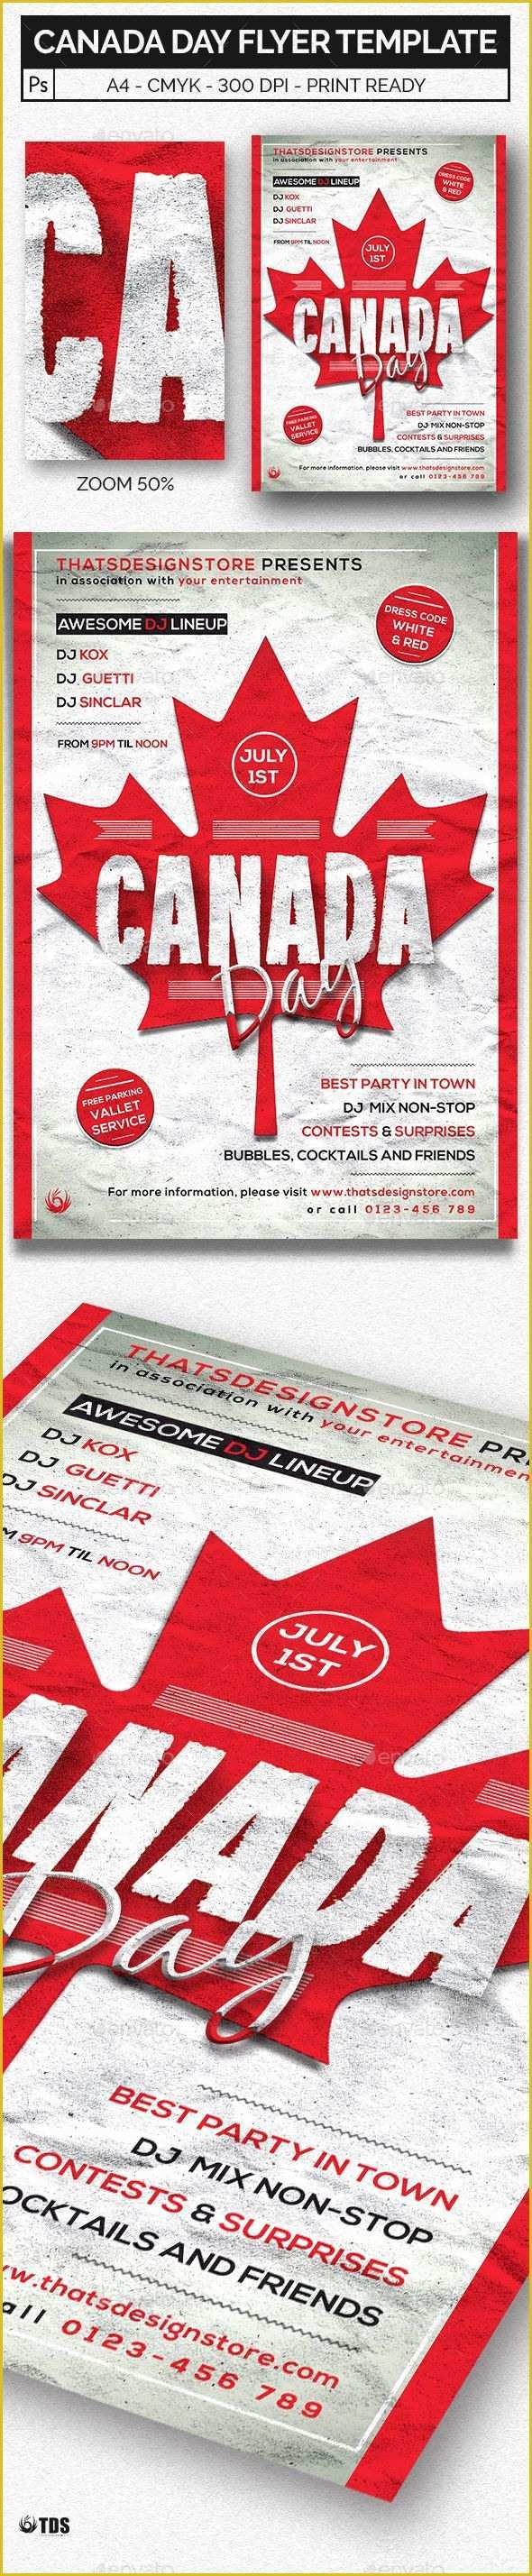 Canada Day Flyer Template Free Of 25 Best Ideas About Flyer Template On Pinterest